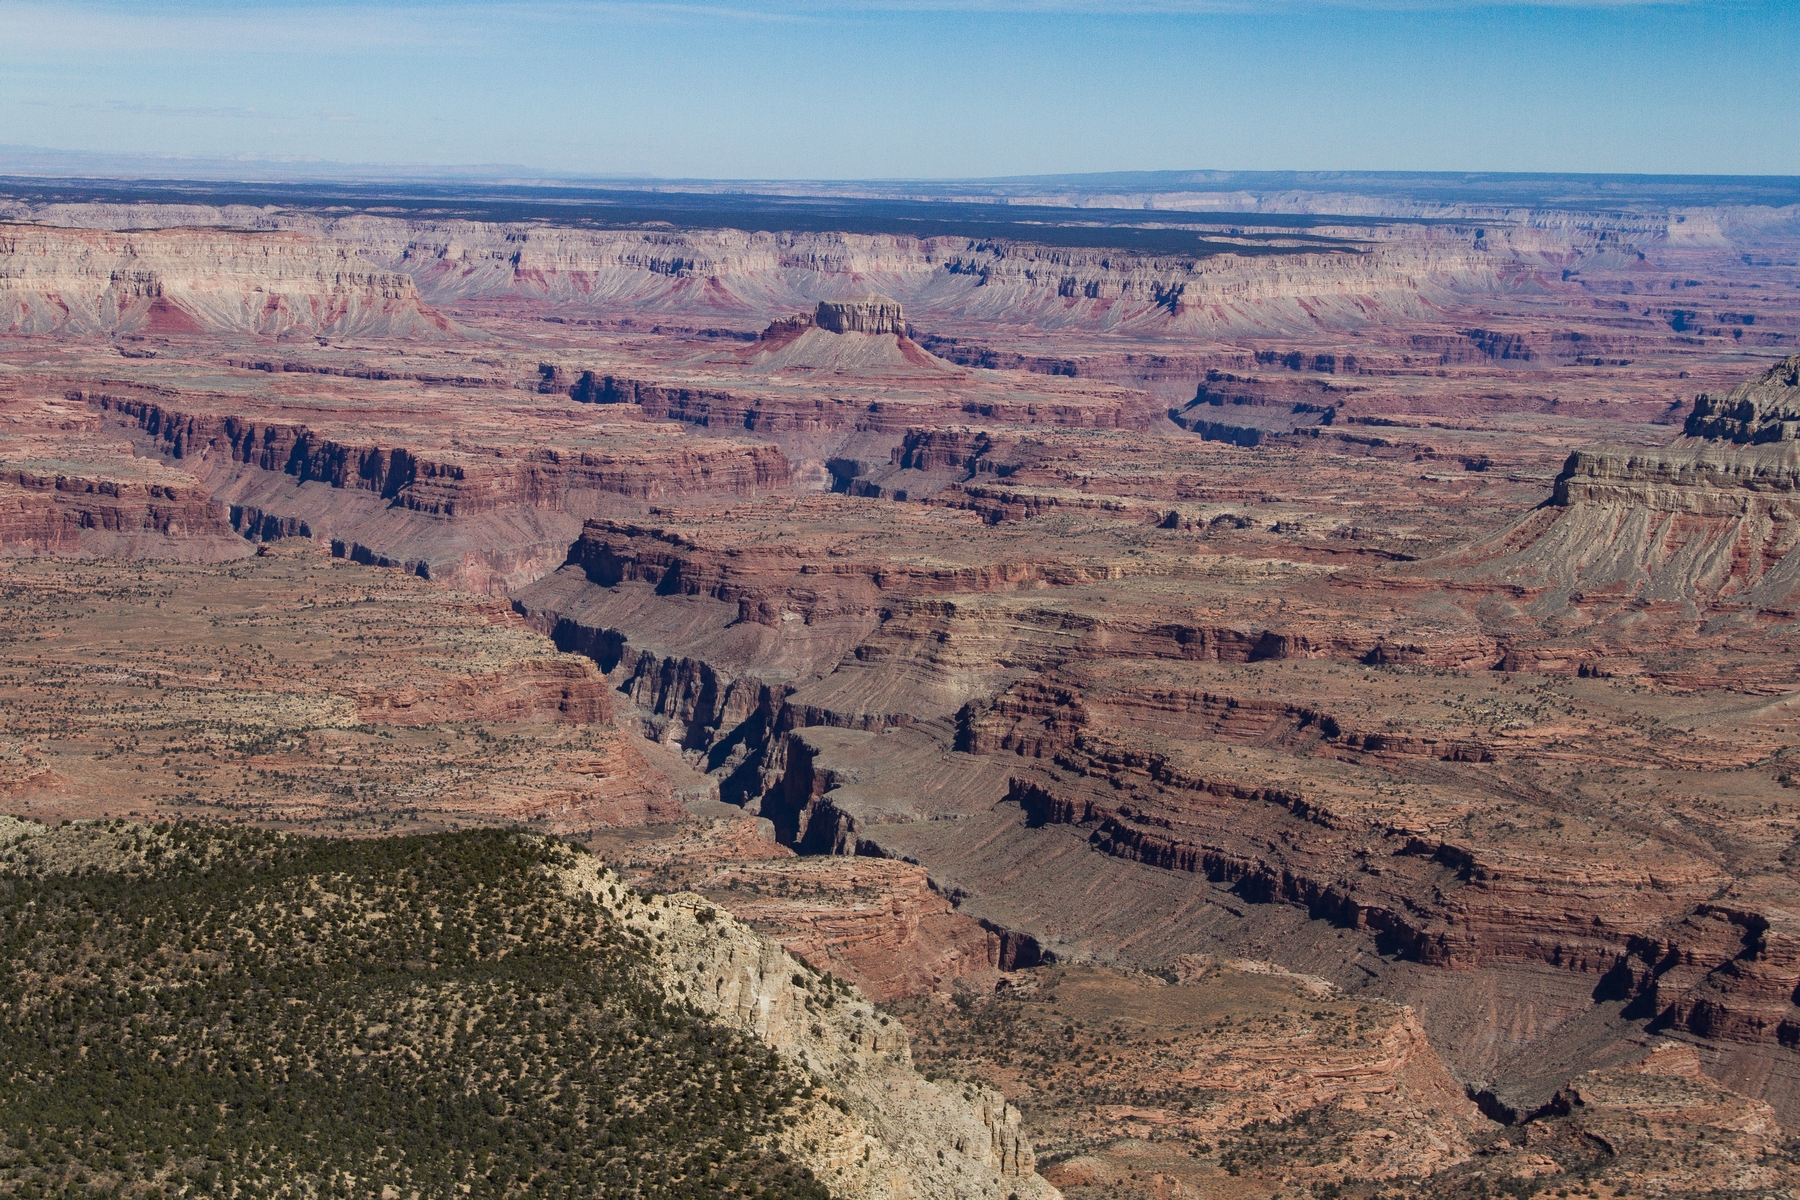 Getting to see the Grand Canyon from the air is quite a treat.